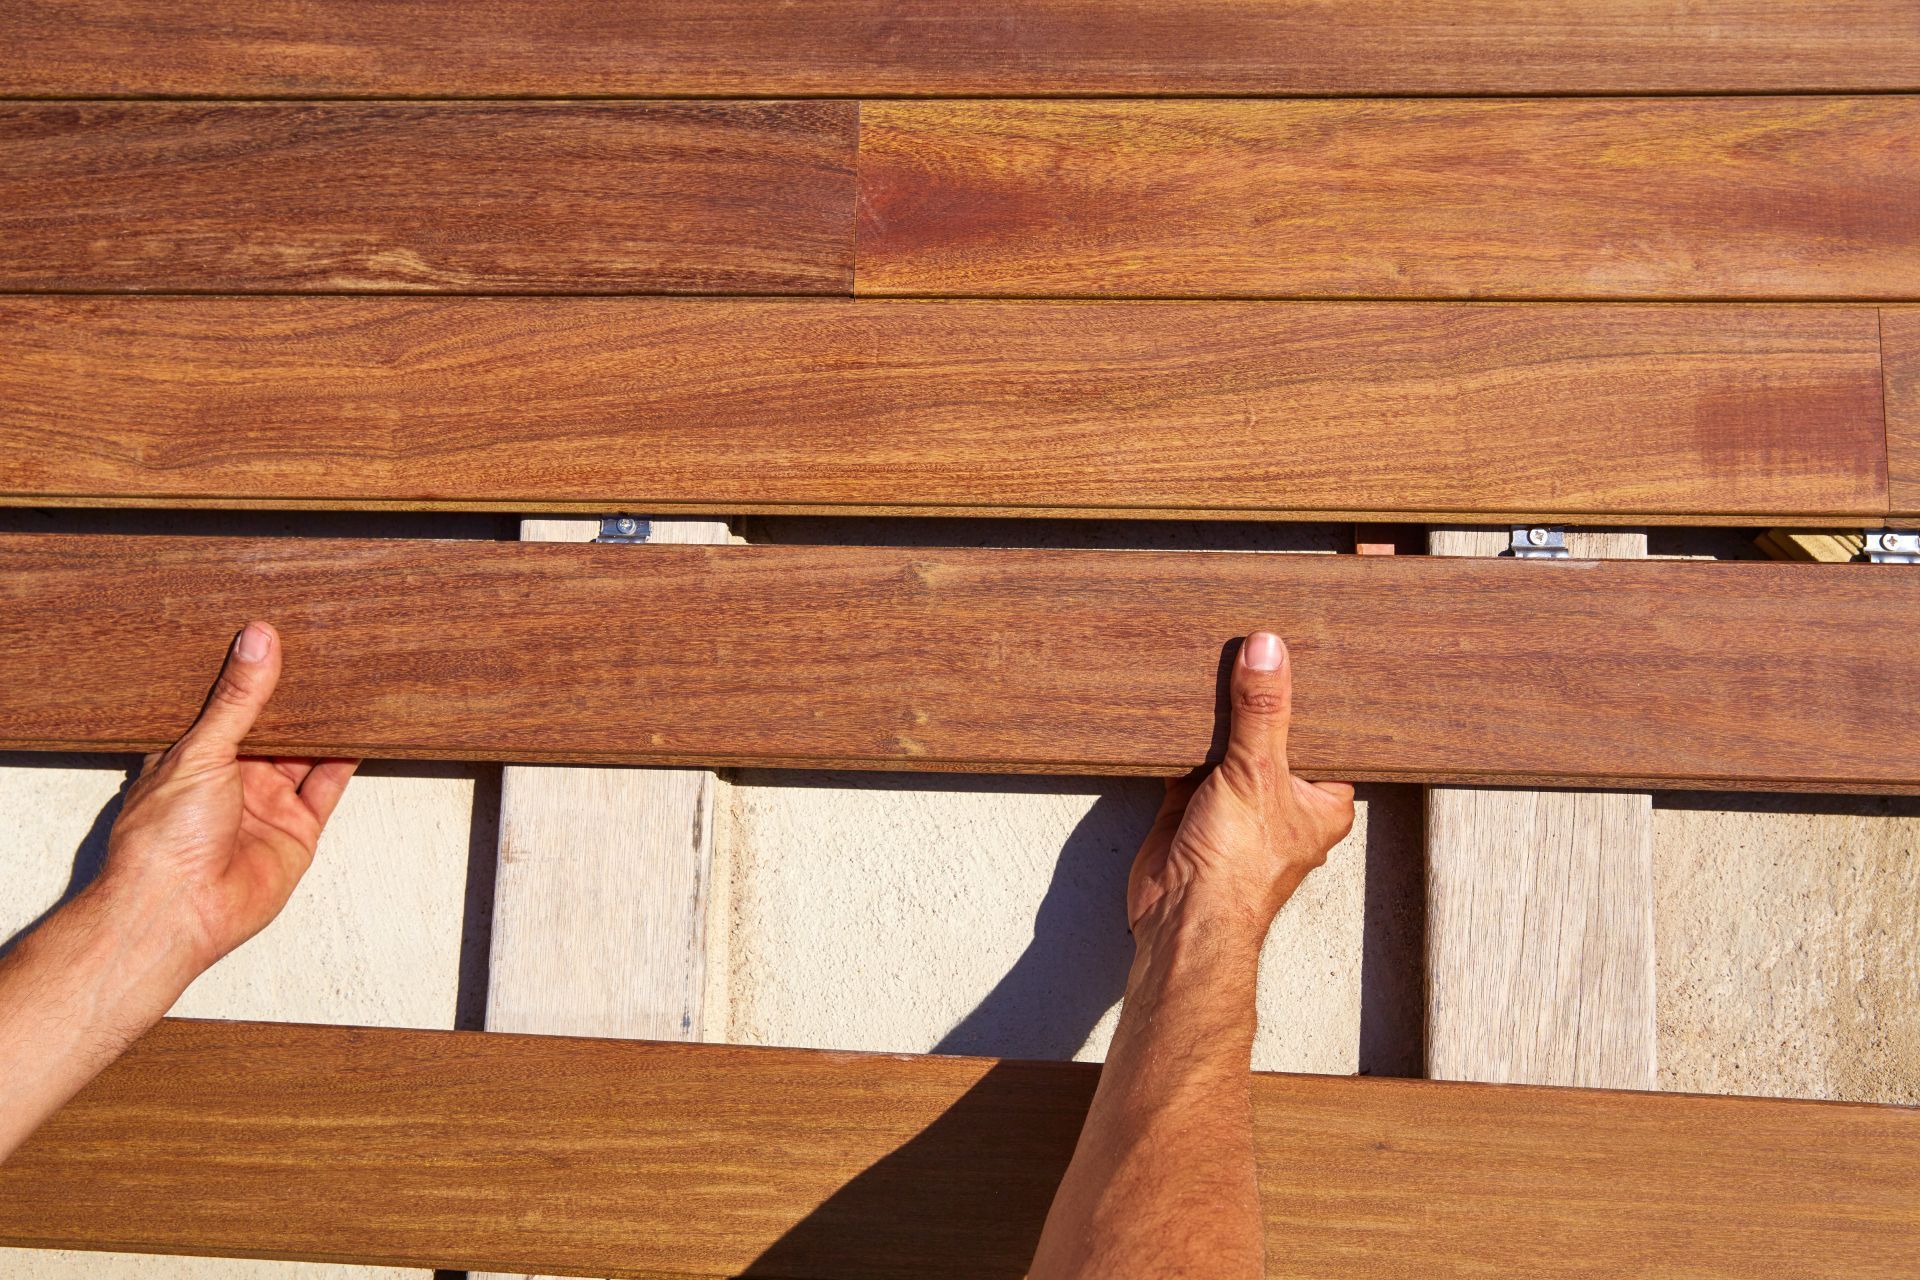 A person's hands are shown installing wooden deck boards on a sunny day in Stockton, California. The top board is being aligned with the others, which have a warm, reddish-brown stain highlighting the wood grain. Visible brackets and screws secure the boards in place, reflecting an in-progress deck construction with a focus on craftsmanship and detail.